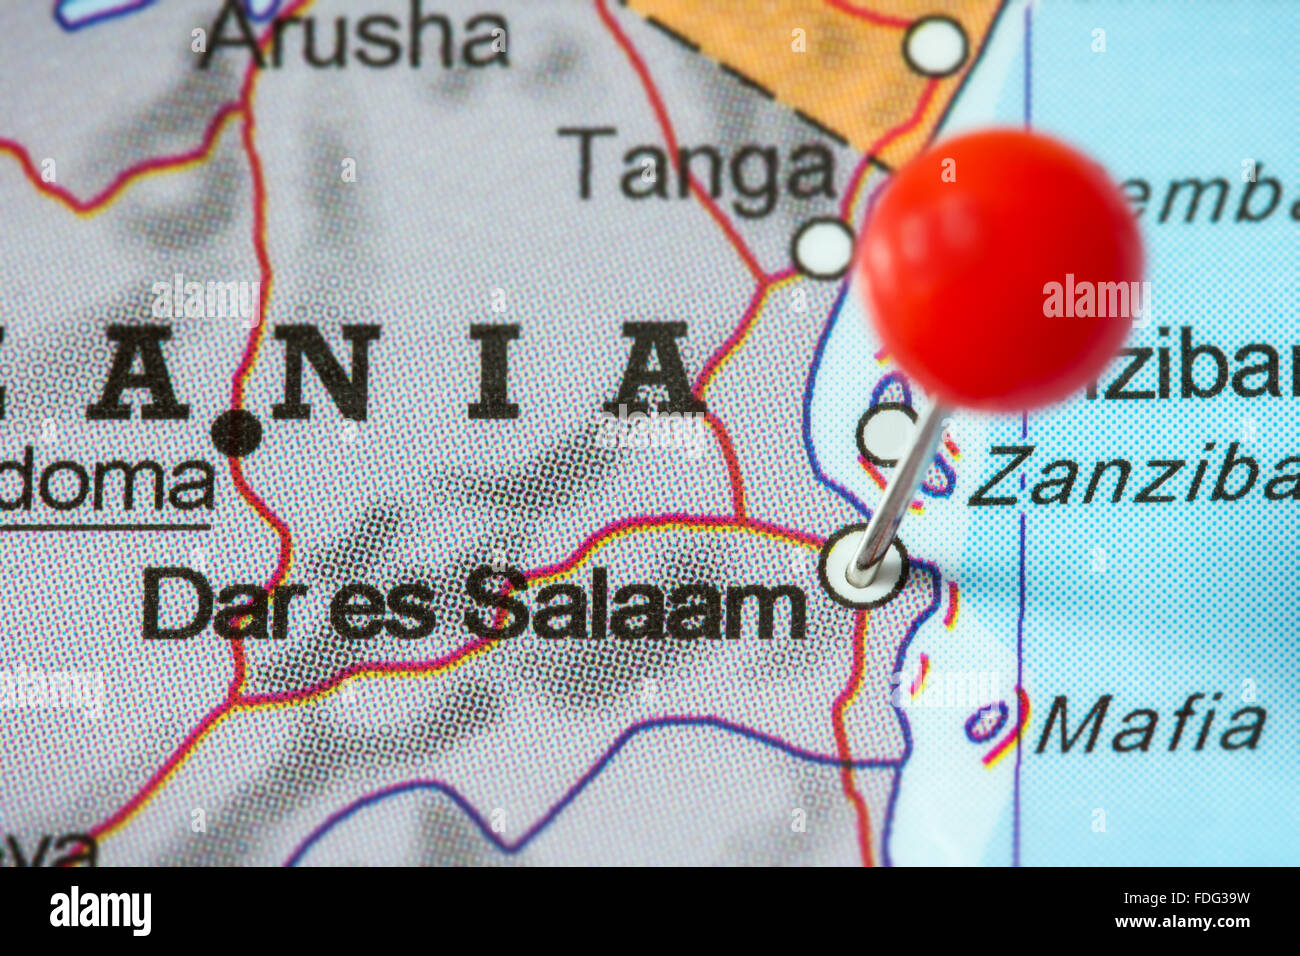 Close-up of a red pushpin in a map of Dar es Salaam, Tanzania. Stock Photo